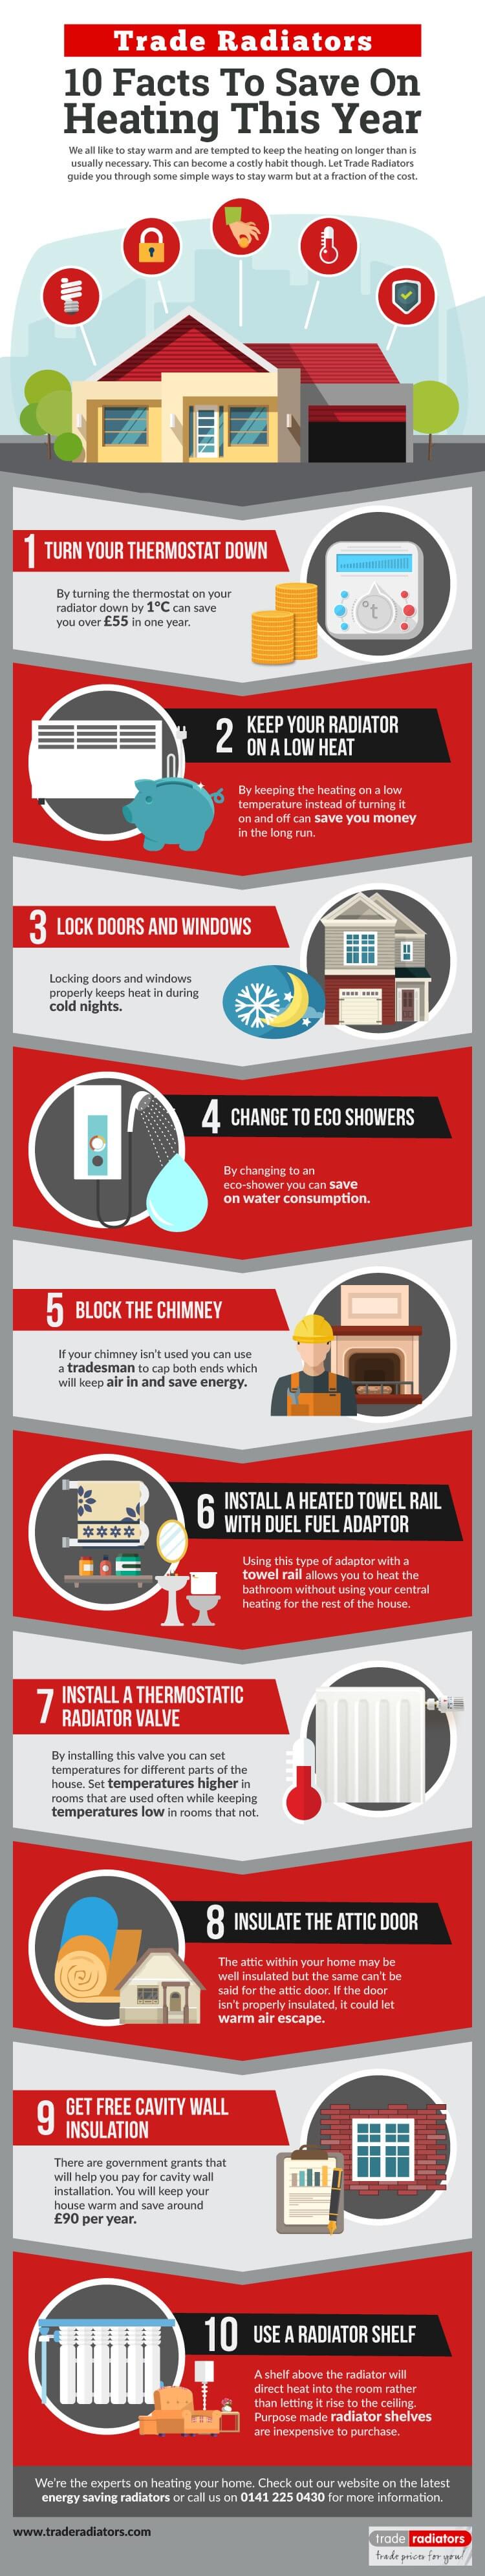 save-on-heating-infographic-plaza